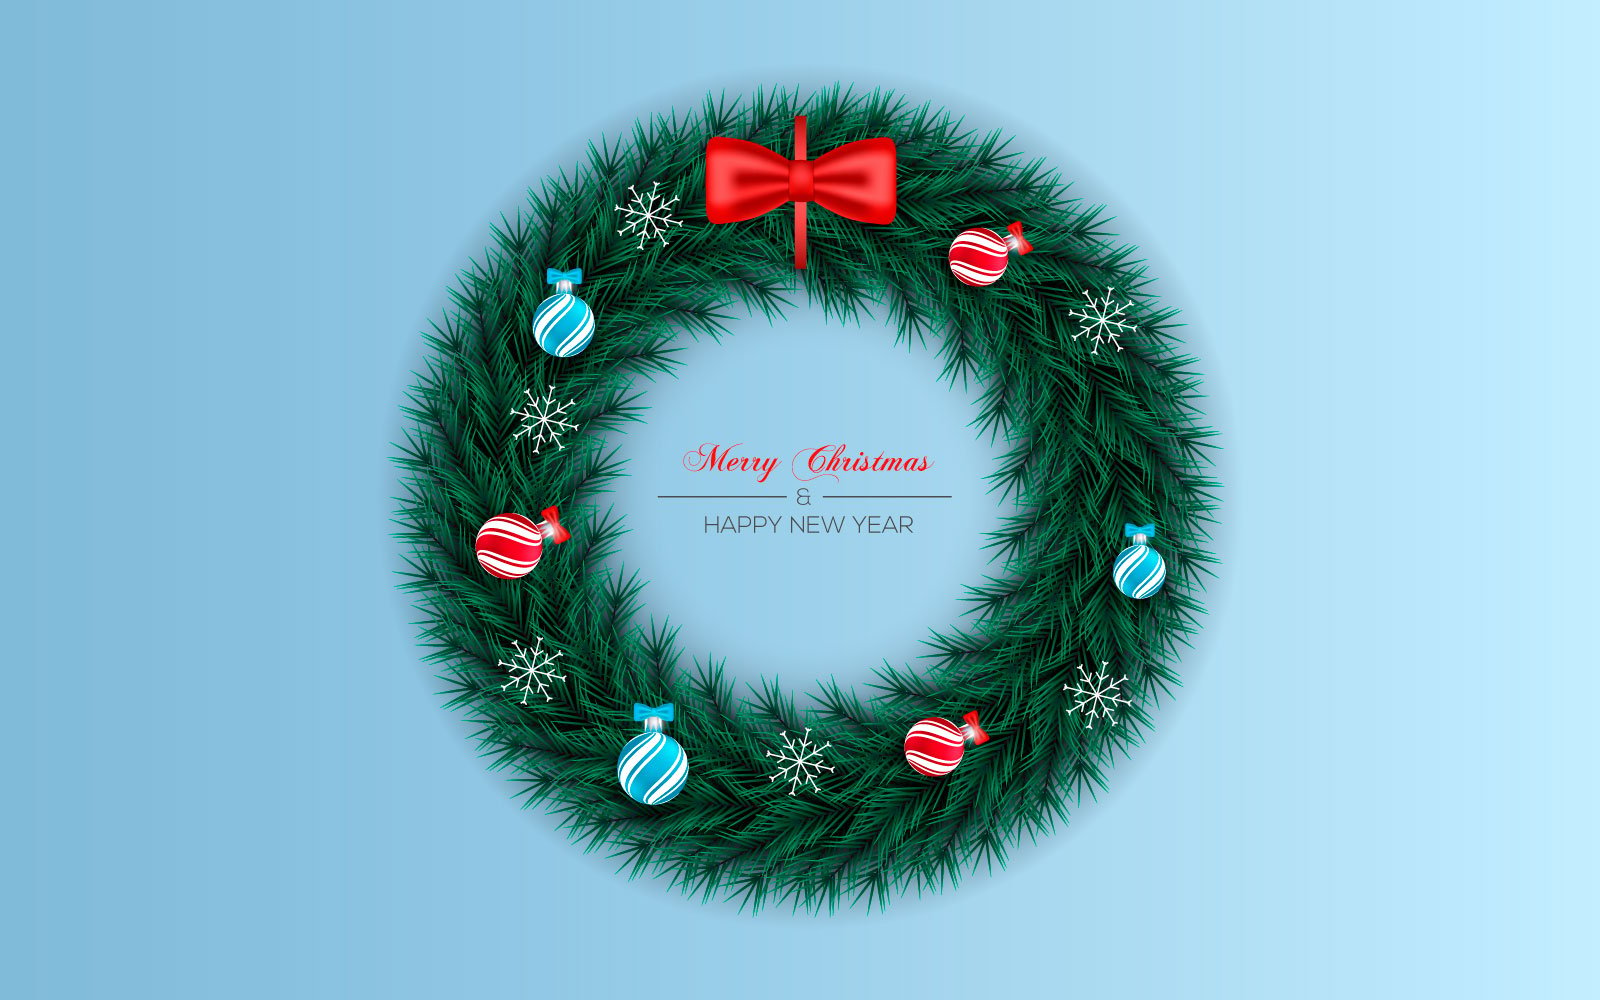 Christmas Wreath Decoration With Pine Branch Christmas Red Ball And Star